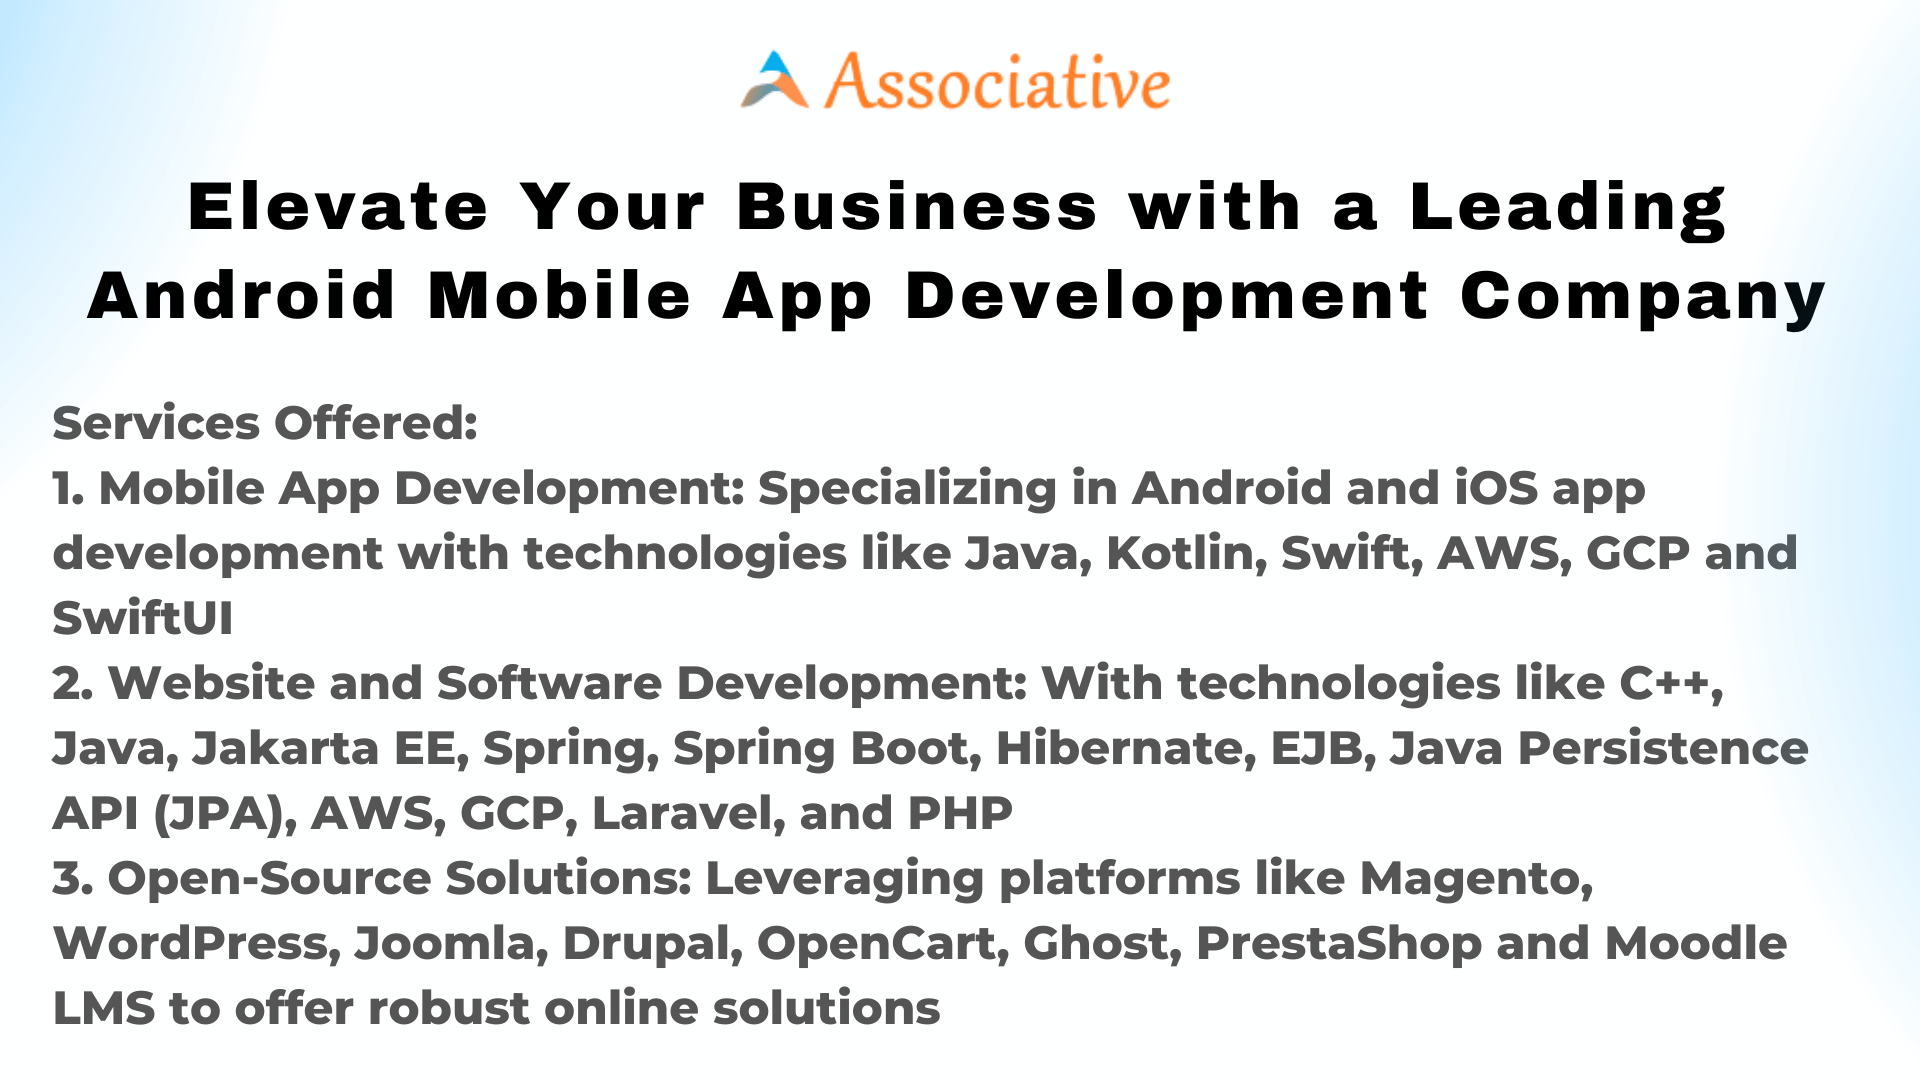 Elevate Your Business with a Leading Android Mobile App Development Company